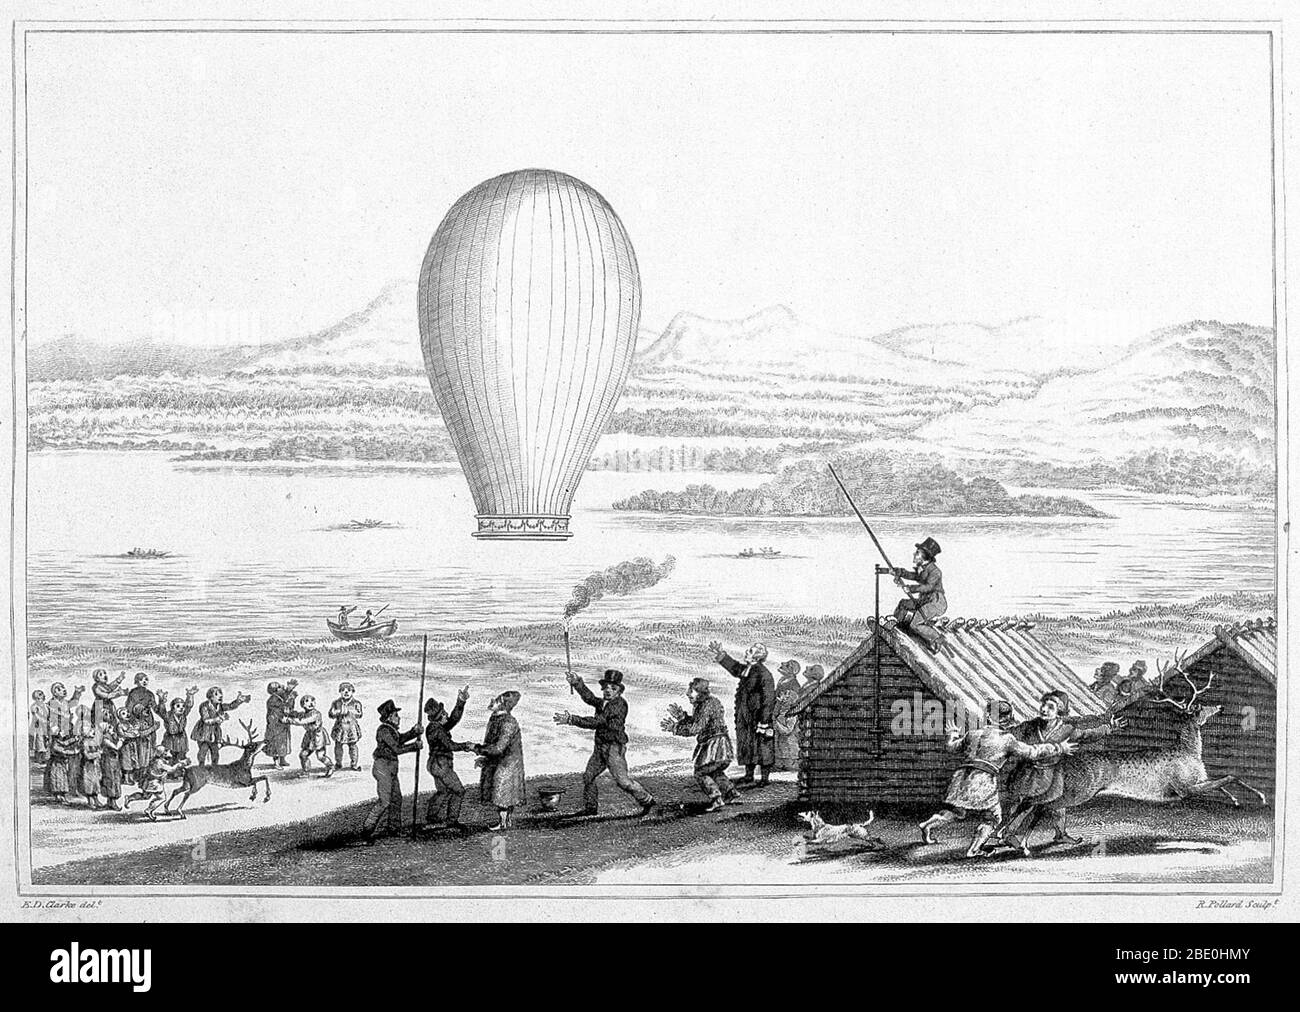 The natives of Tornea Lapmark, assembled at Enontekis in Lapland to witness the launch of the first Balloon within the Arctic Circle. From 'Travels in various countries of Europe Asia and Africa' by Edward Daniel Clarke. Published: 1819. A man sitting on the roof of a store house is holding a pole from which the balloon had been suspended; another man holds a stick burning at one end from generating the heat to inflate the balloon. Many Laplanders in foreground watch the balloon ascension while reindeer, frightened by the balloon, scamper off. Stock Photo